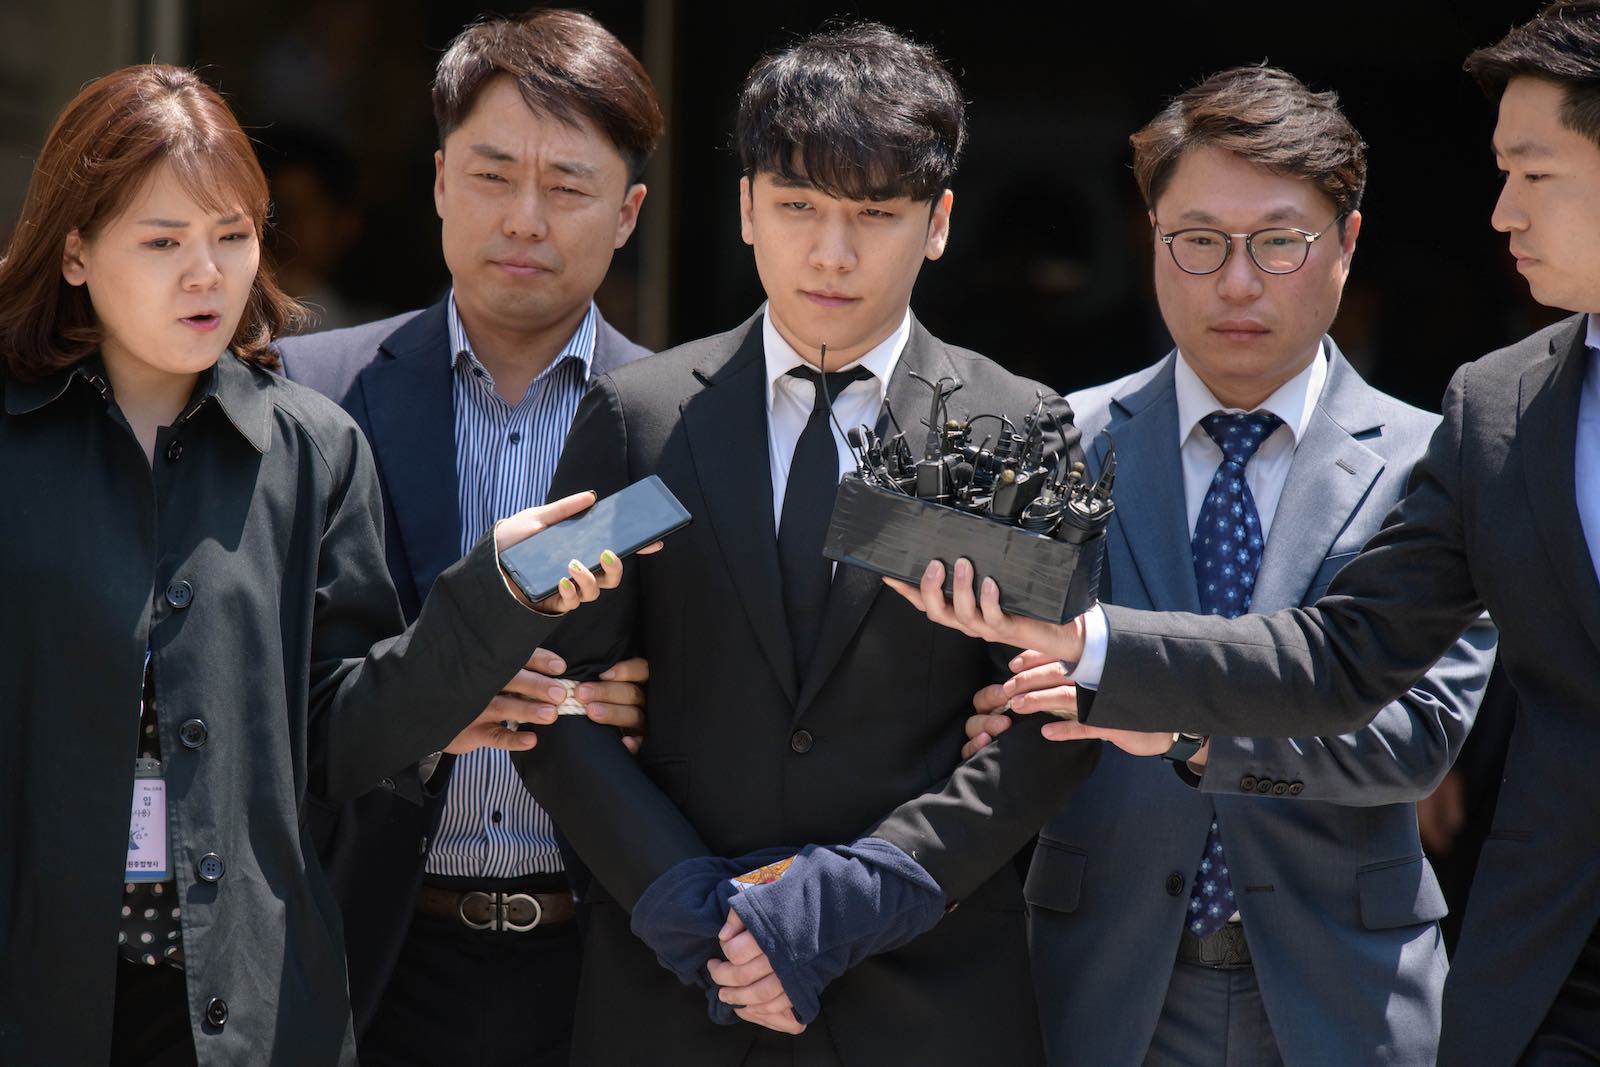 Korean School Sex - The Burning Sun scandal that torched South Korea's elites | Lowy Institute